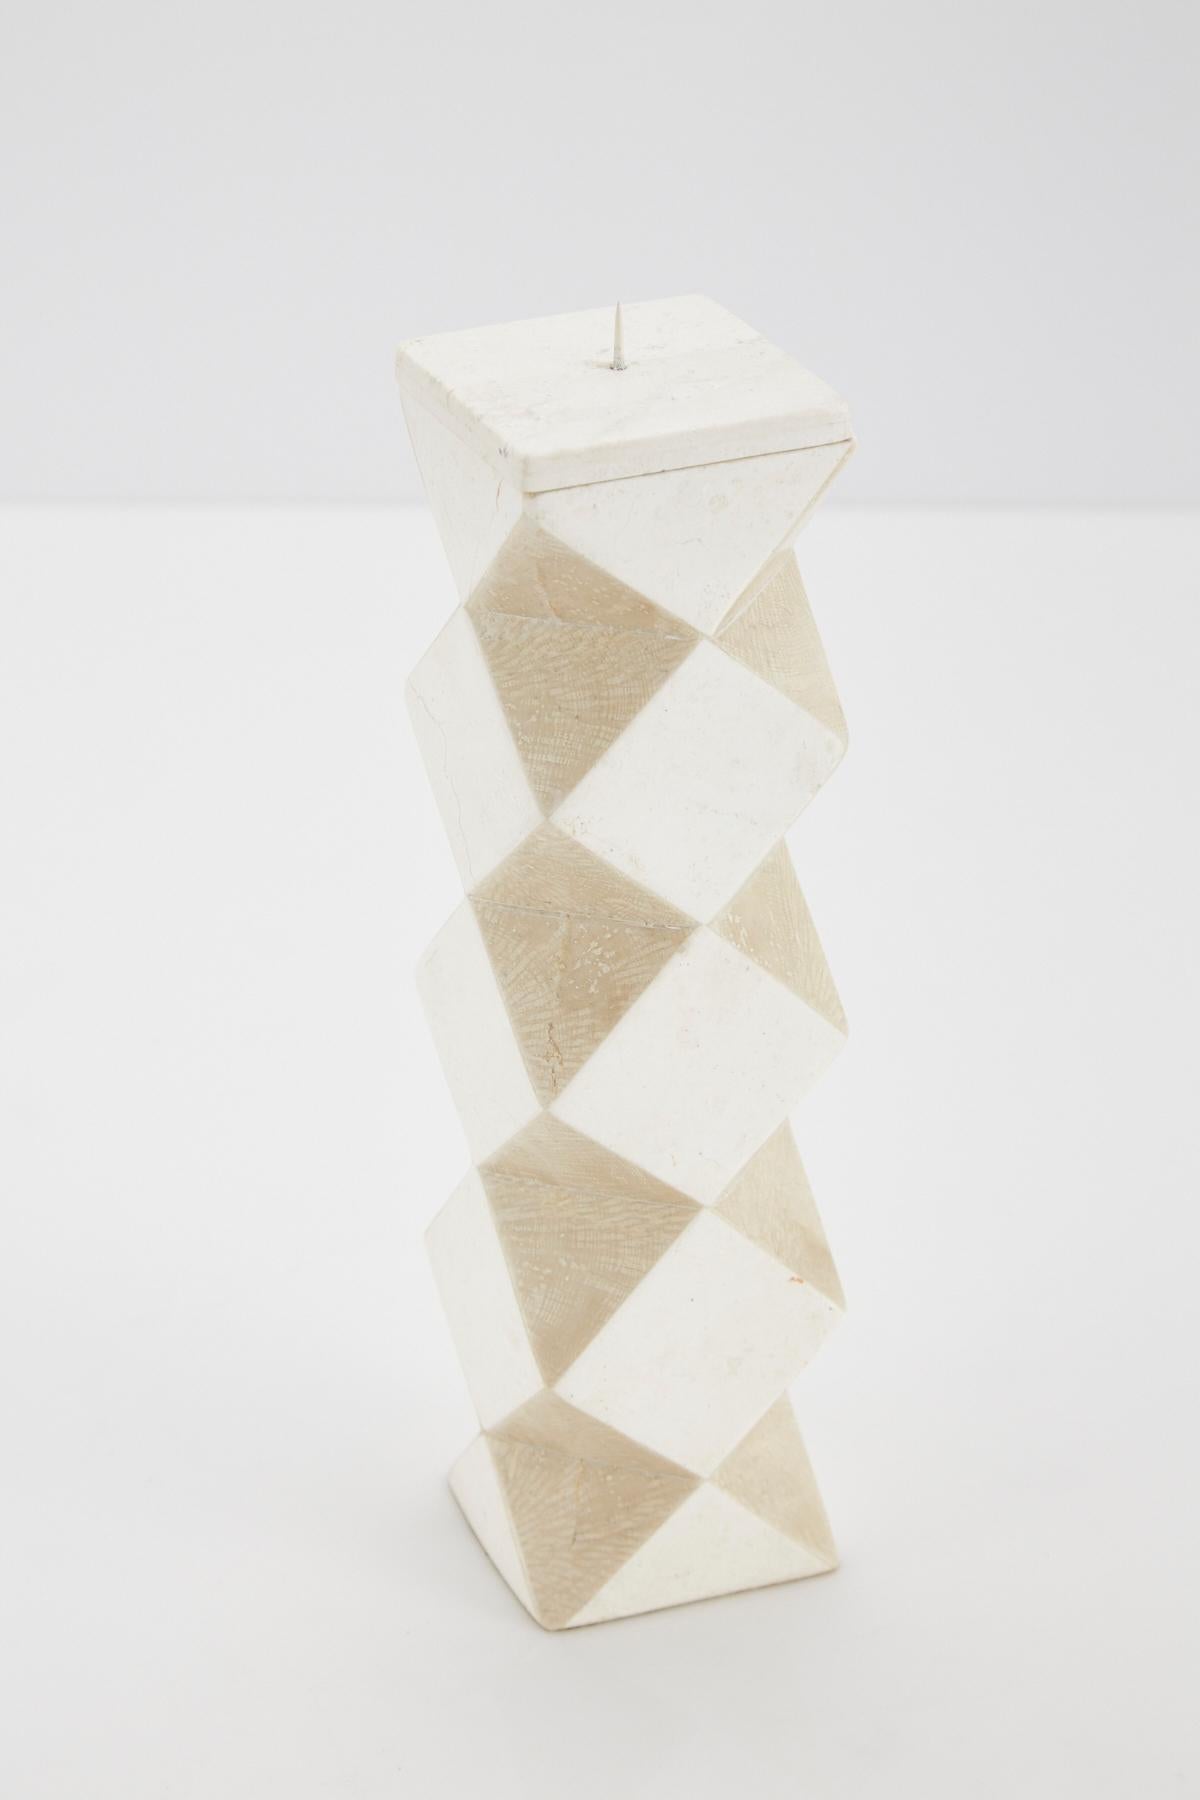 Late 20th Century Convertible Faceted Postmodern Tessellated Stone Candlestick or Vase, 1990s For Sale